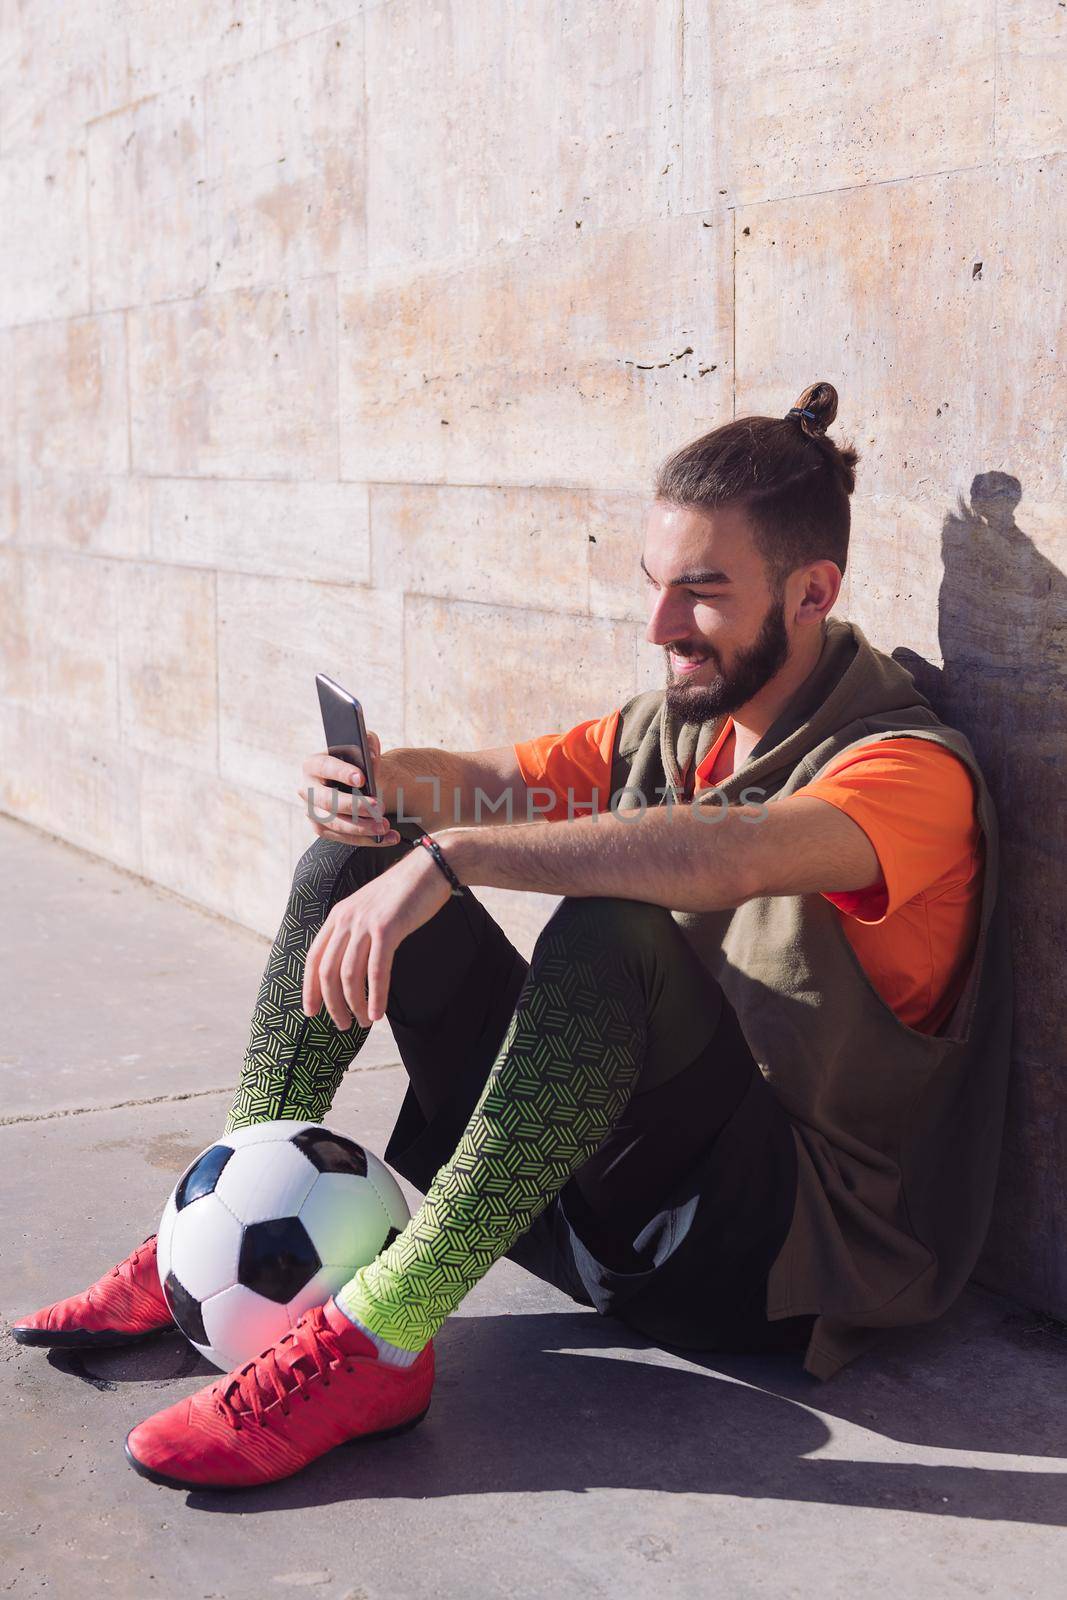 vertical photo of a fashionable soccer player rest sitting on the court consulting his mobile phone, concept of technology and urban sport lifestyle in the city, copy space for text